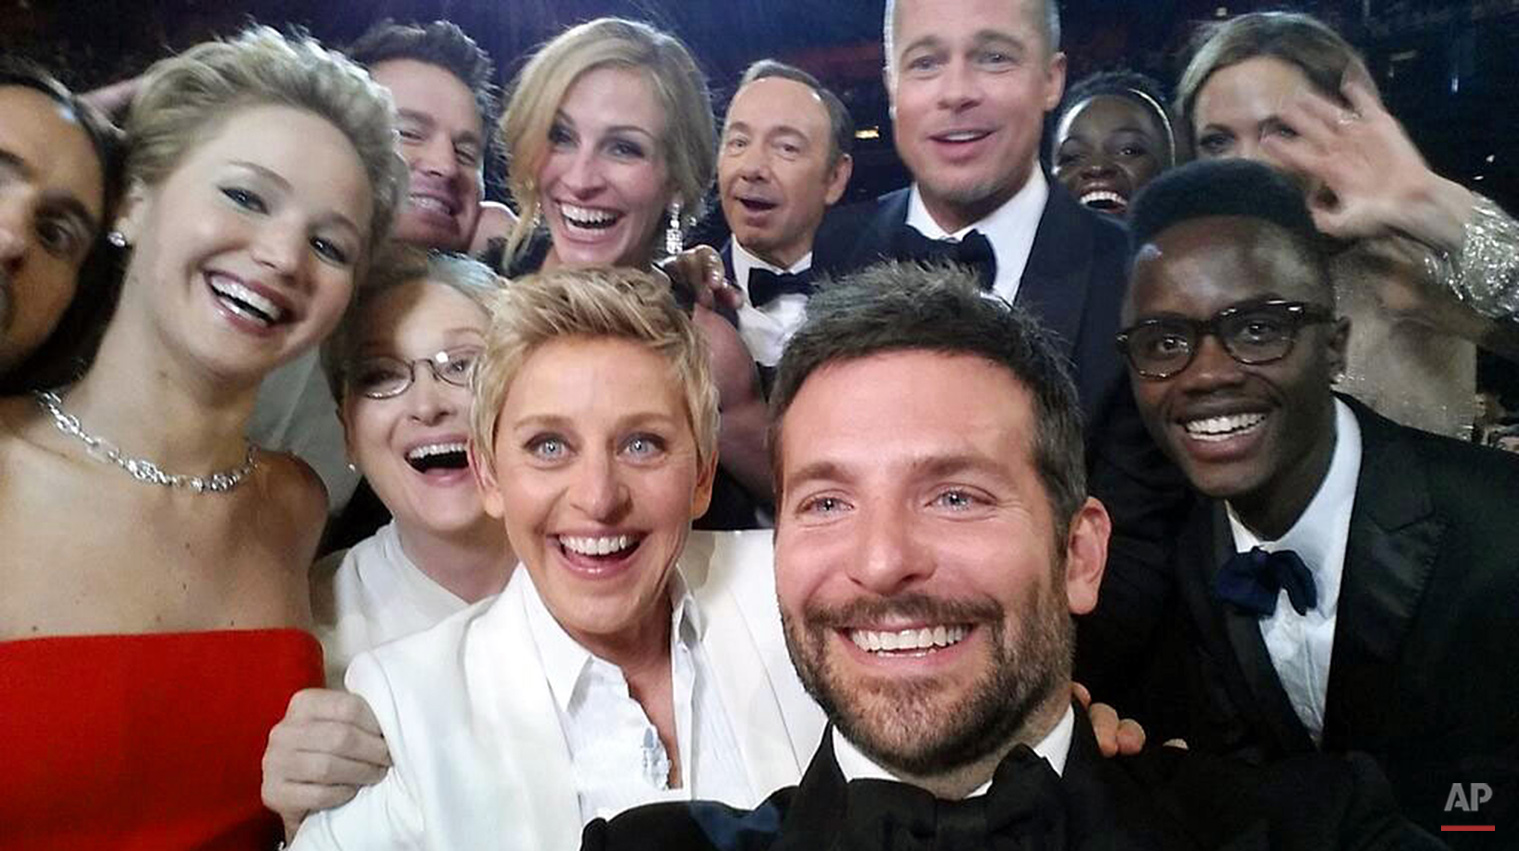  This image released by Ellen DeGeneres shows actors, front row from left, Jared Leto, Jennifer Lawrence, Meryl Streep, Ellen DeGeneres, Bradley Cooper, Peter Nyong’o Jr. and, second row, from left, Channing Tatum, Julia Roberts, Kevin Spacey, Brad P